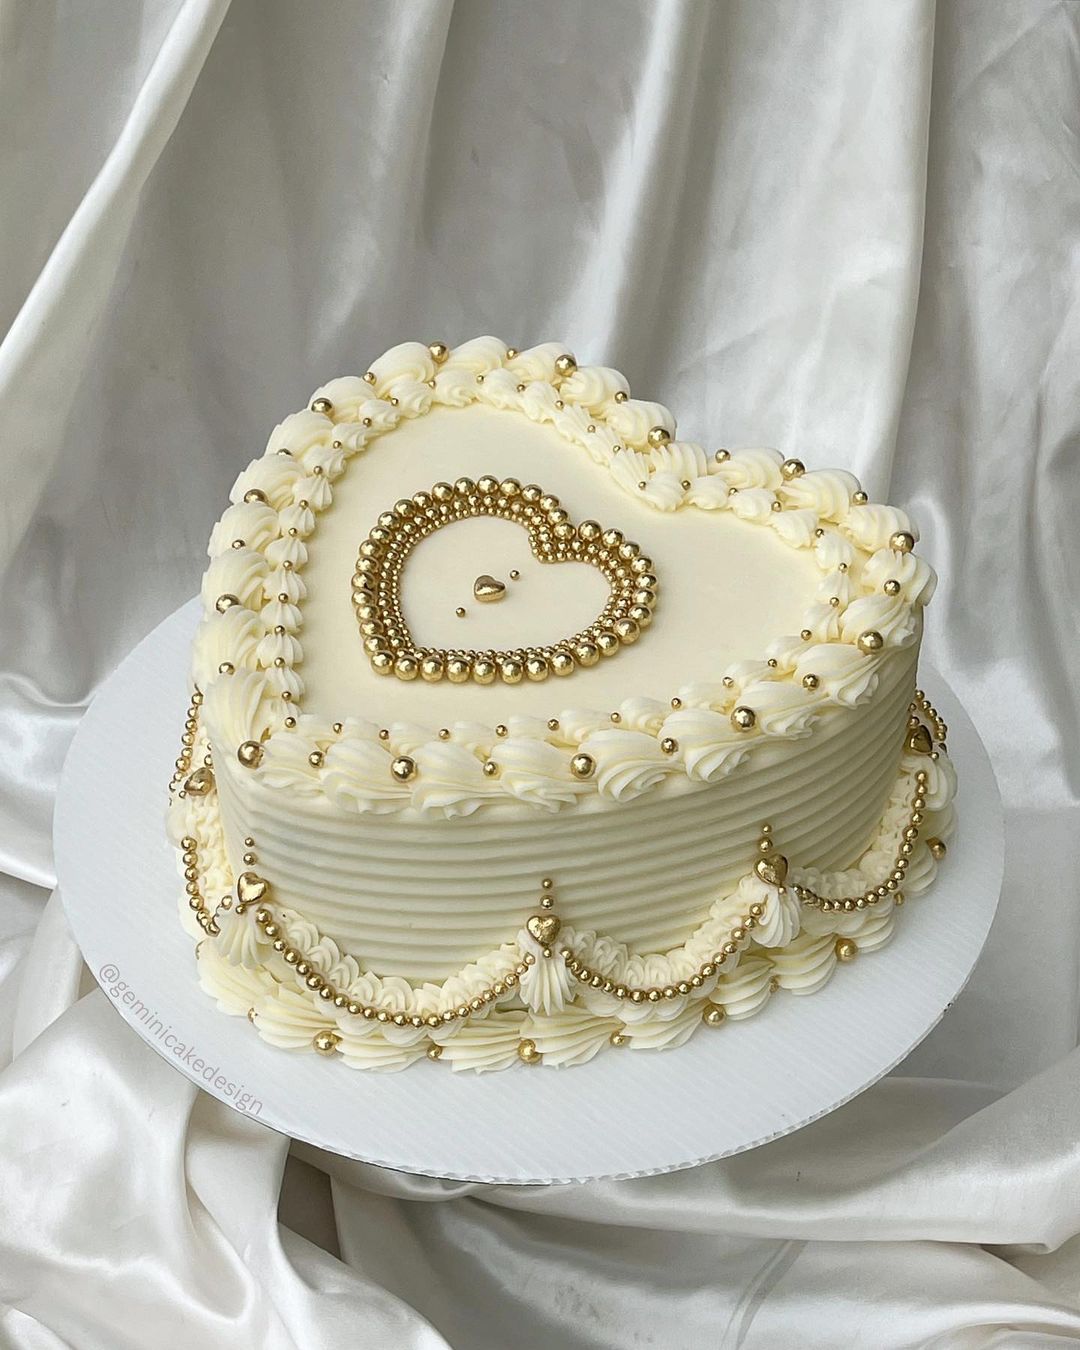 Cake designs that are perfect for both weddings and birthdays